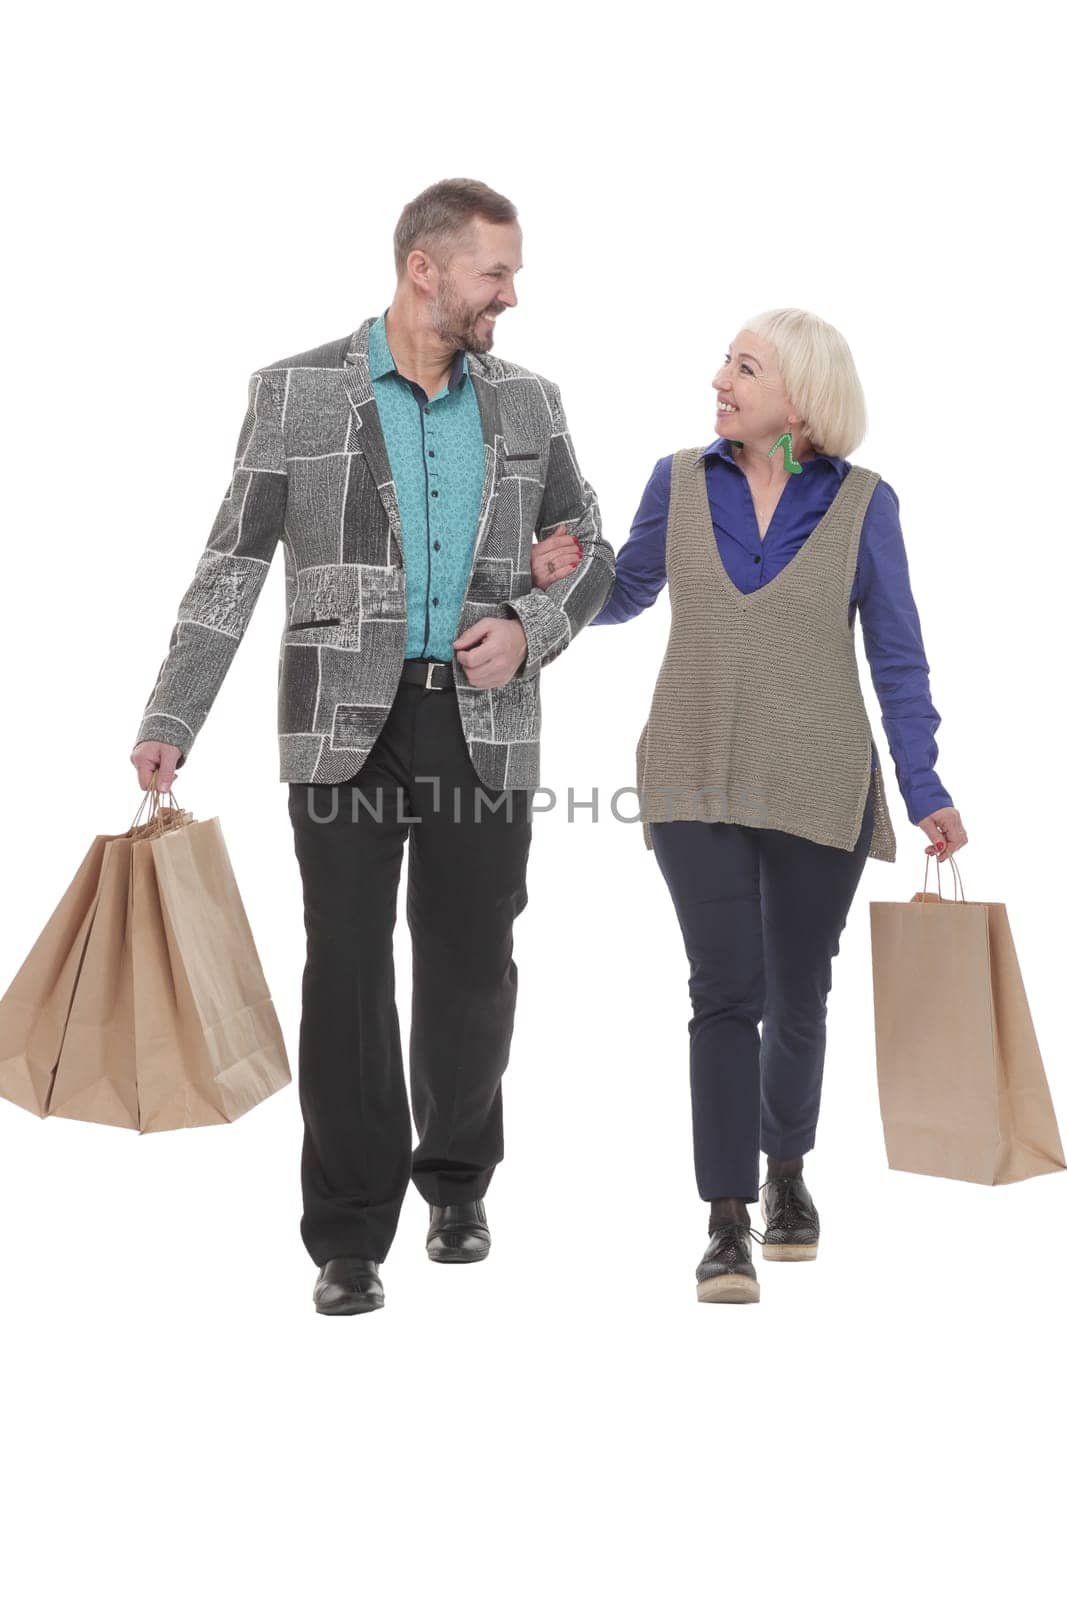 in full growth. happy married couple with shopping bags. by asdf